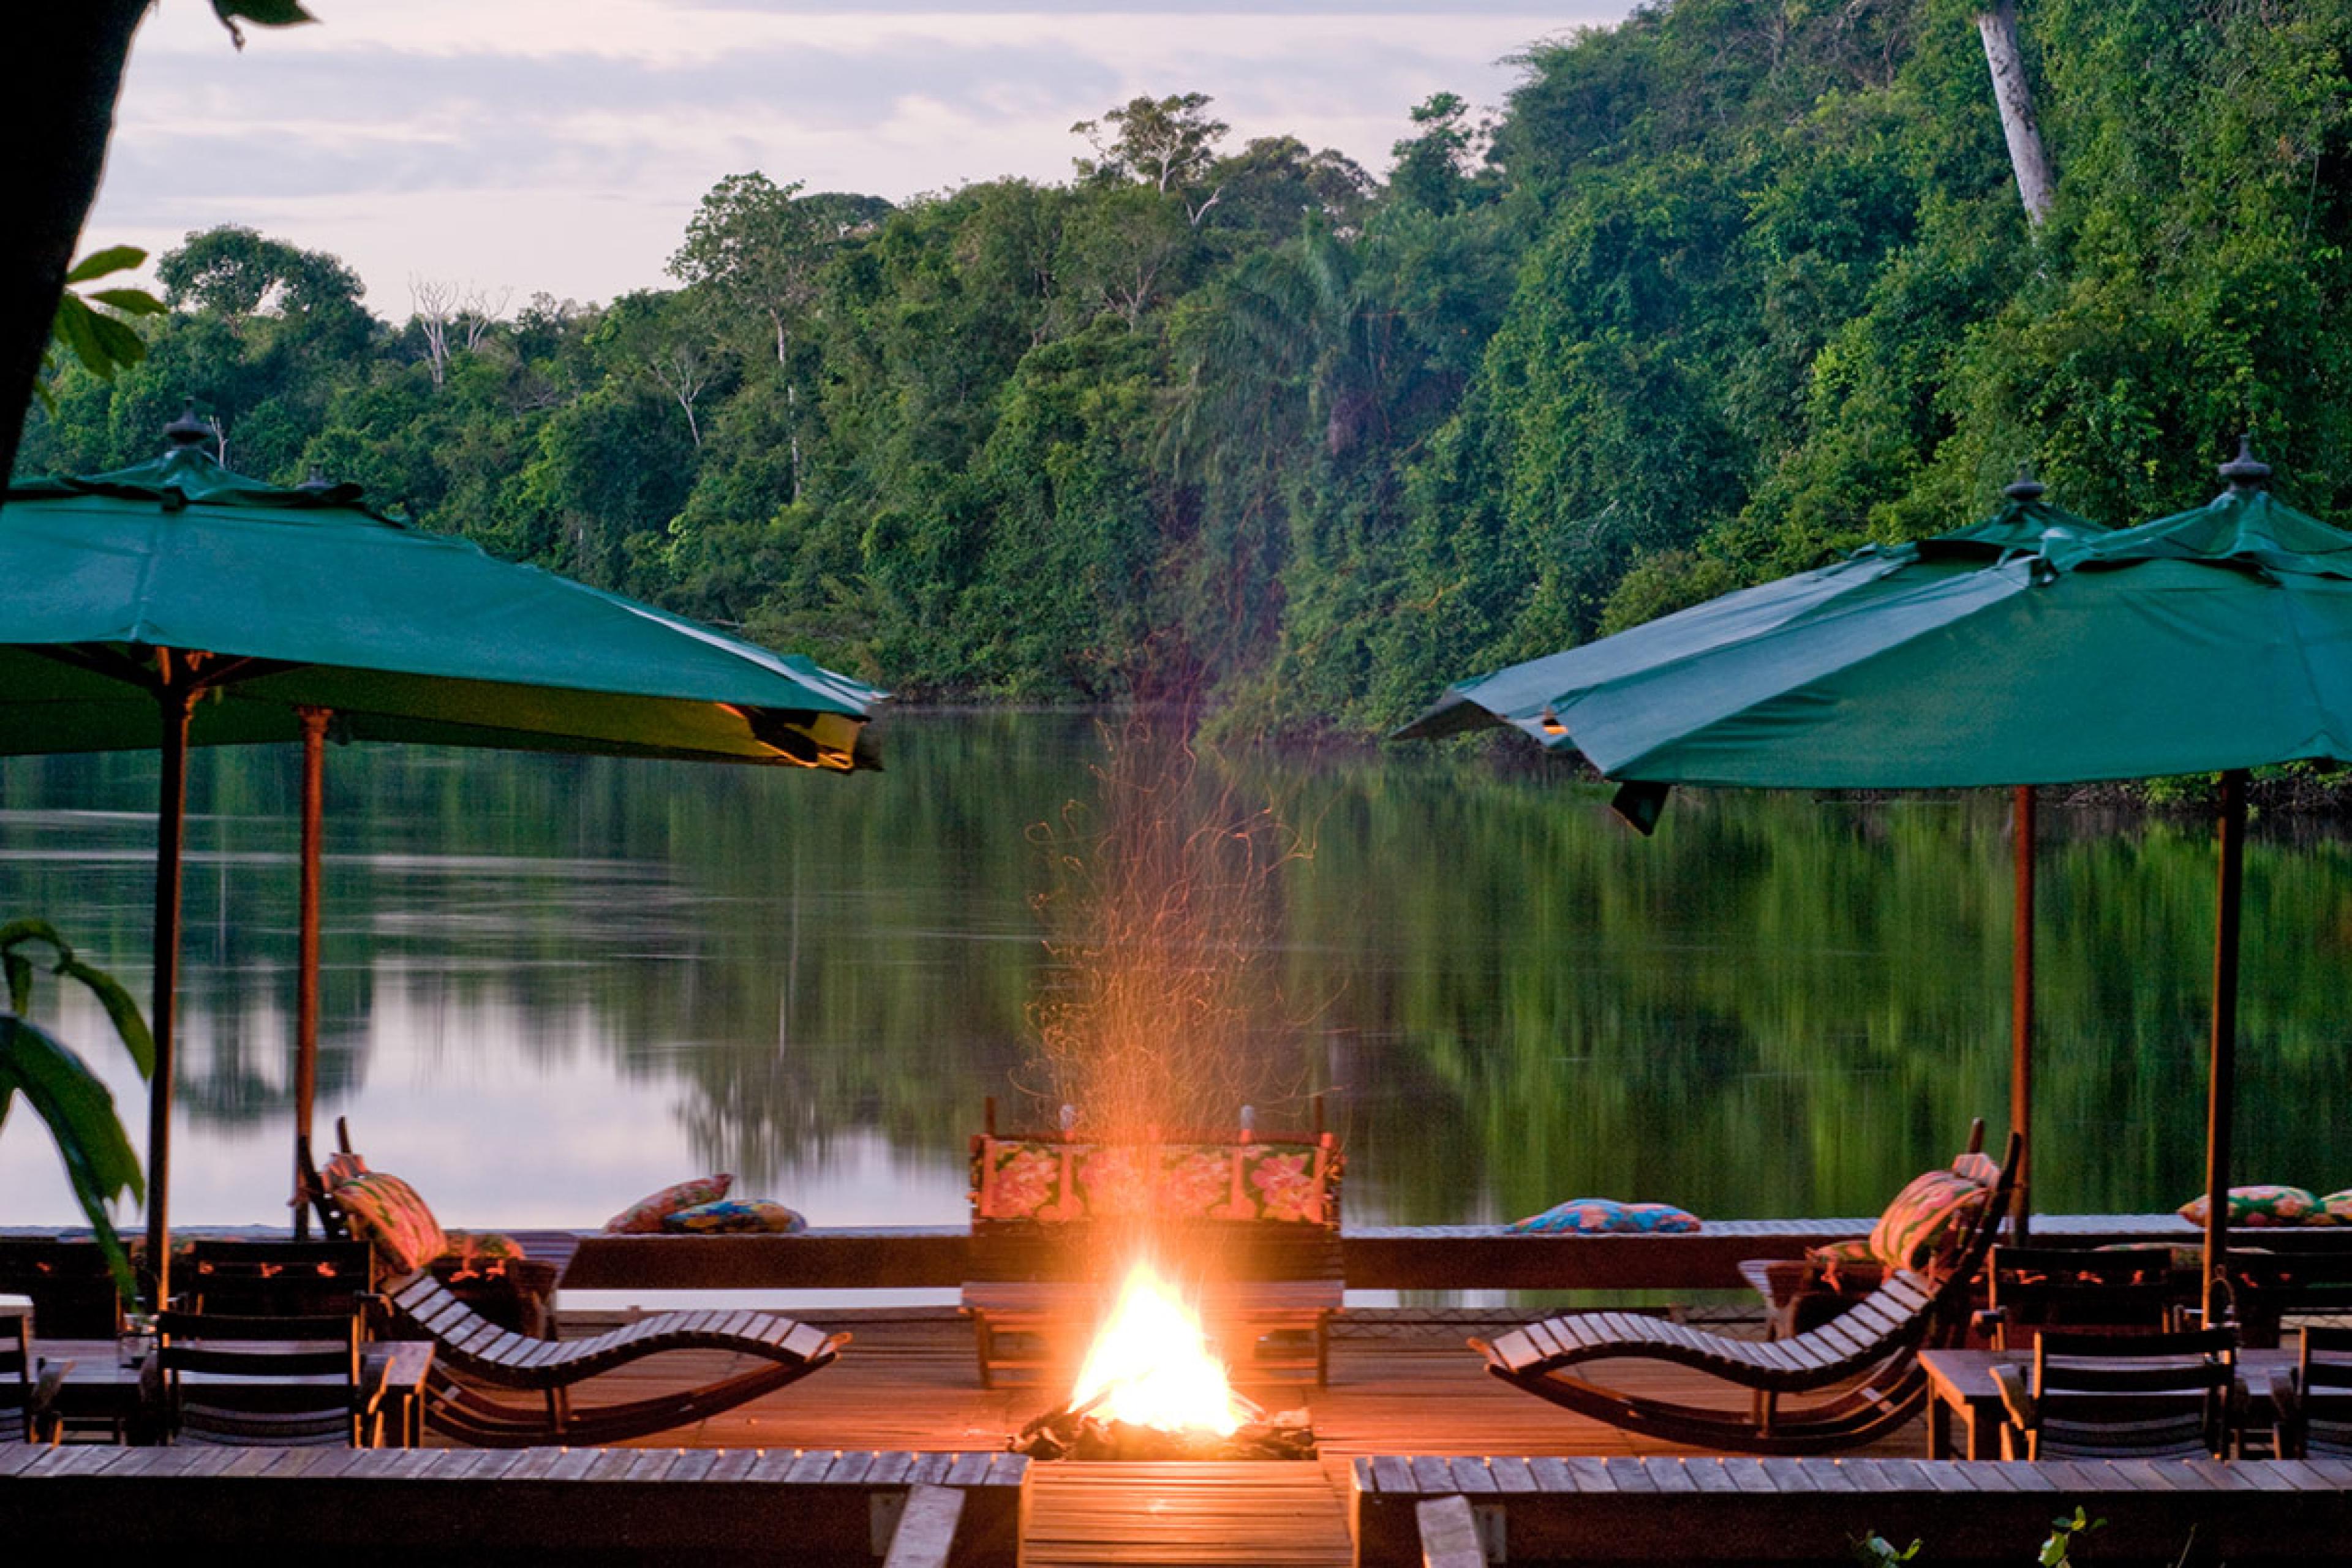 a fire pit on a floating dock with wooden lounge chairs and a green umbrellas at dusk along a river